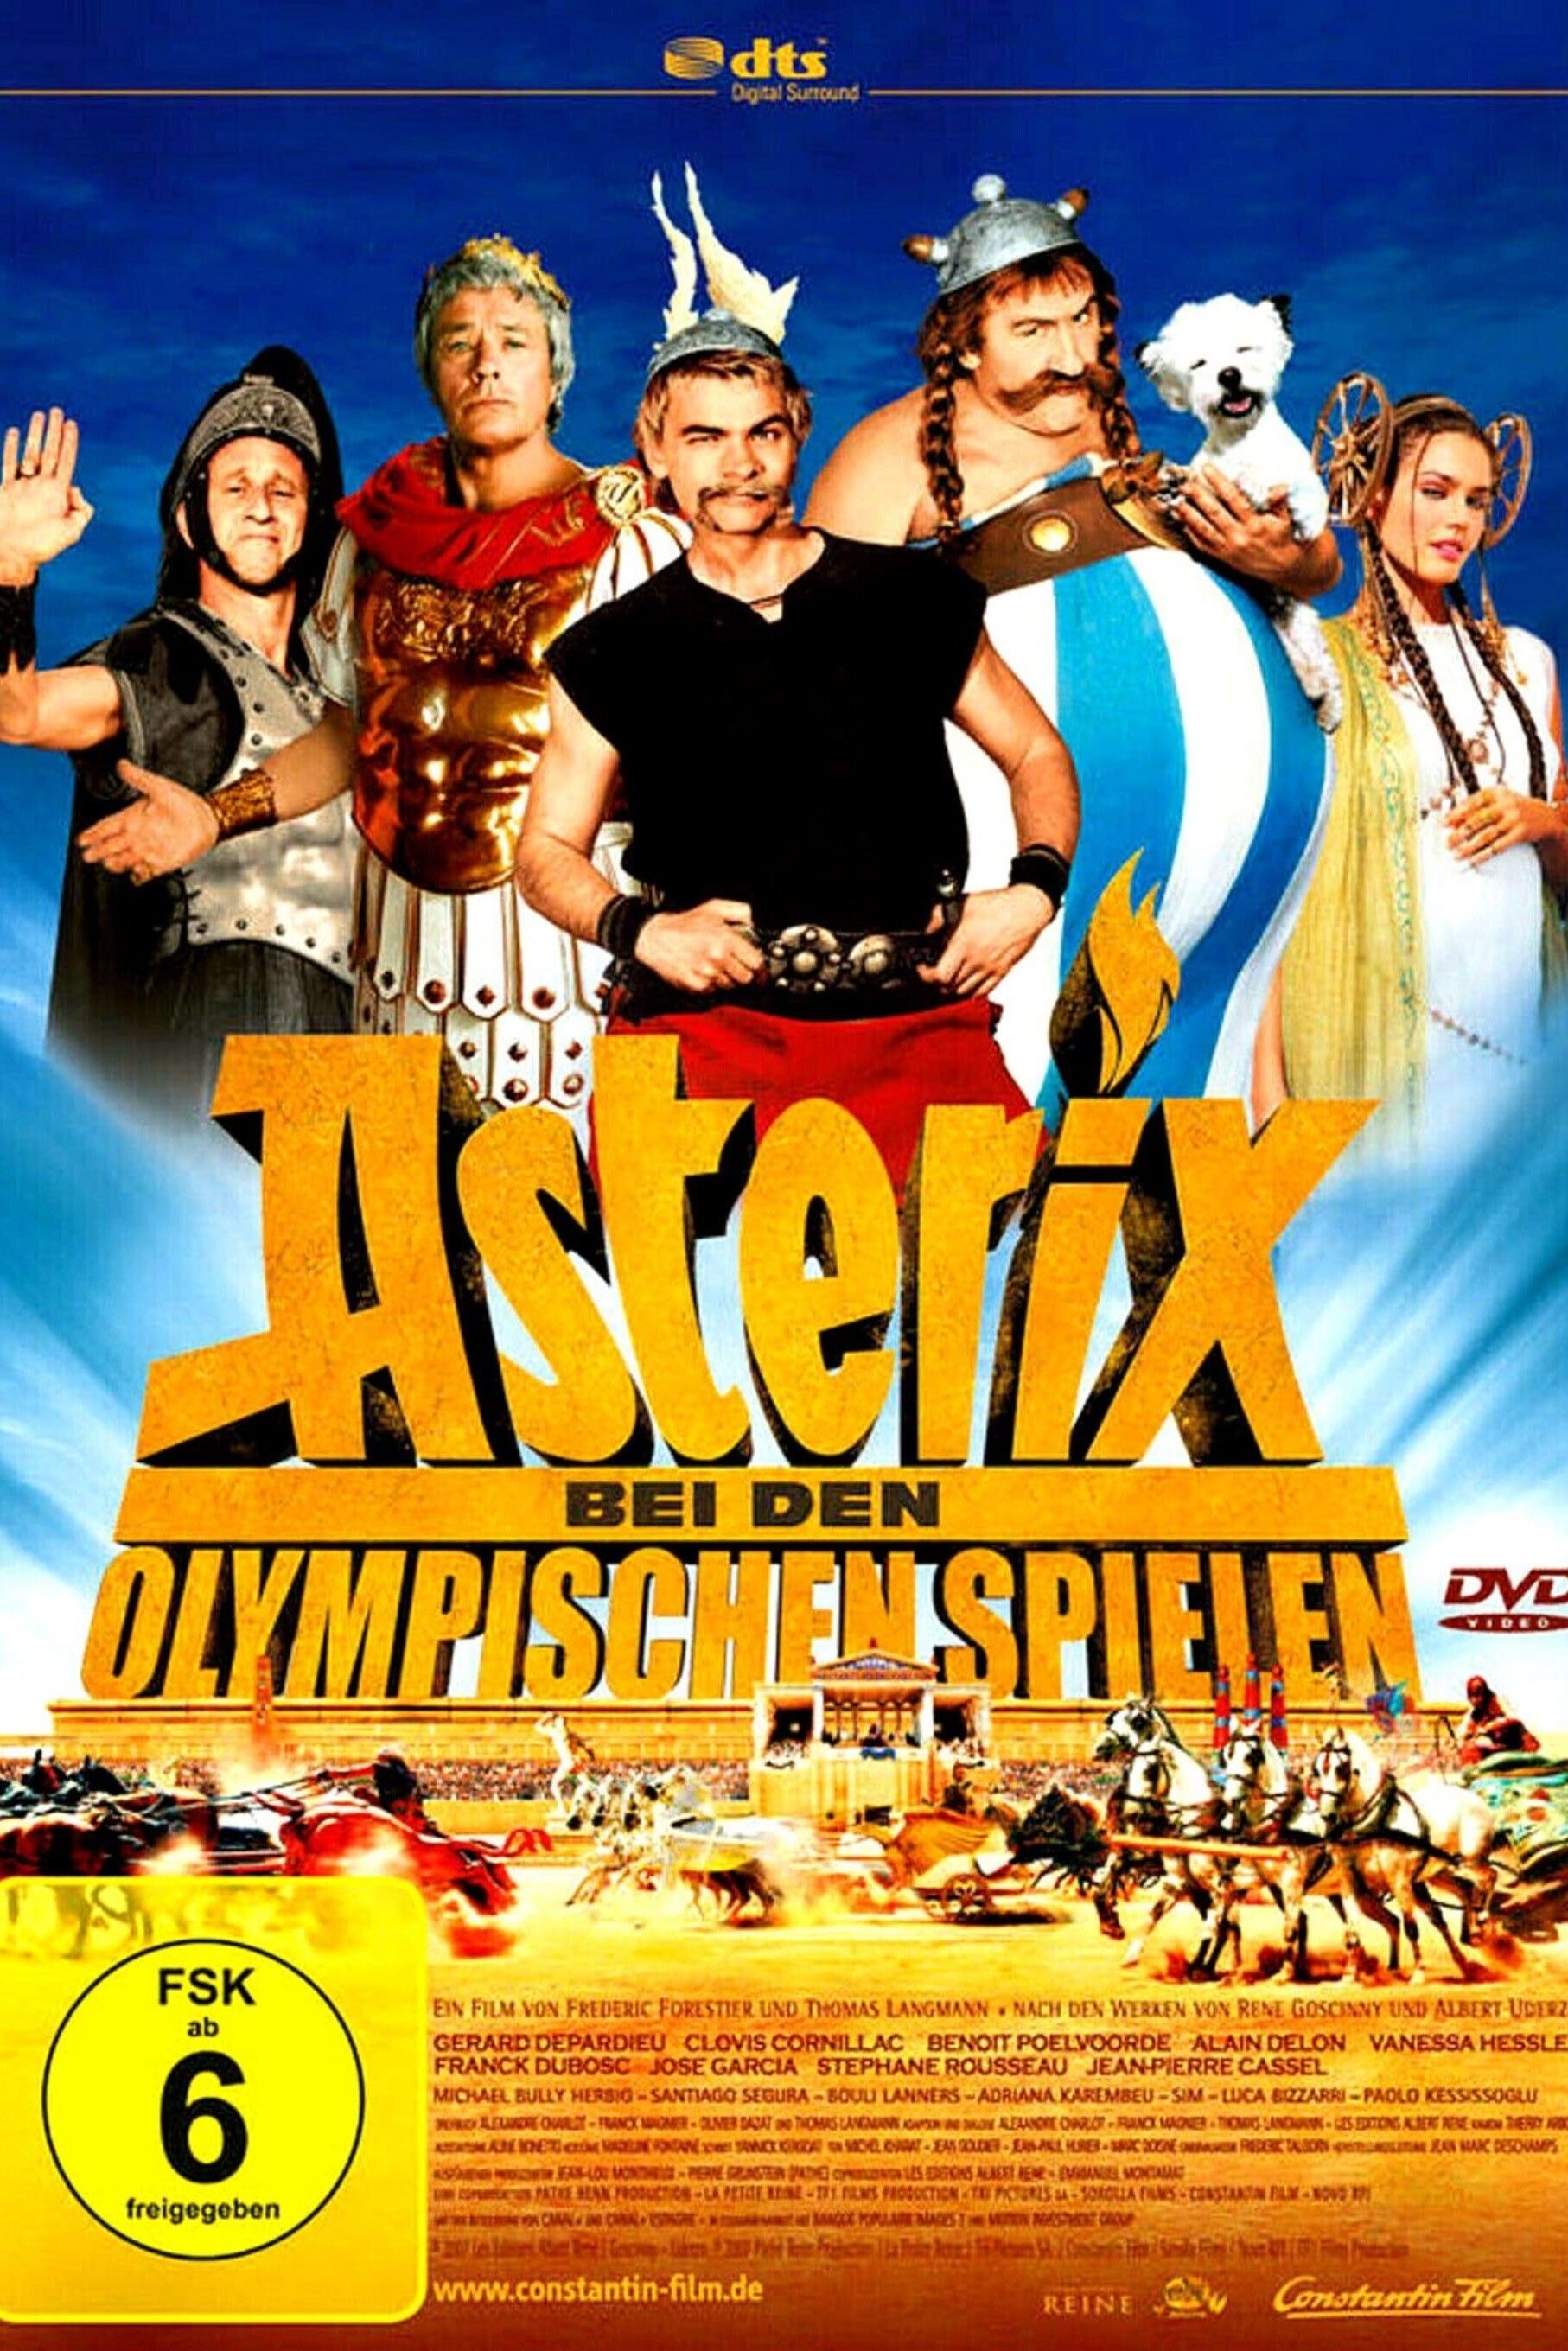 Astérix at the Olympic Games (2008) Movie Information & Trailers ...